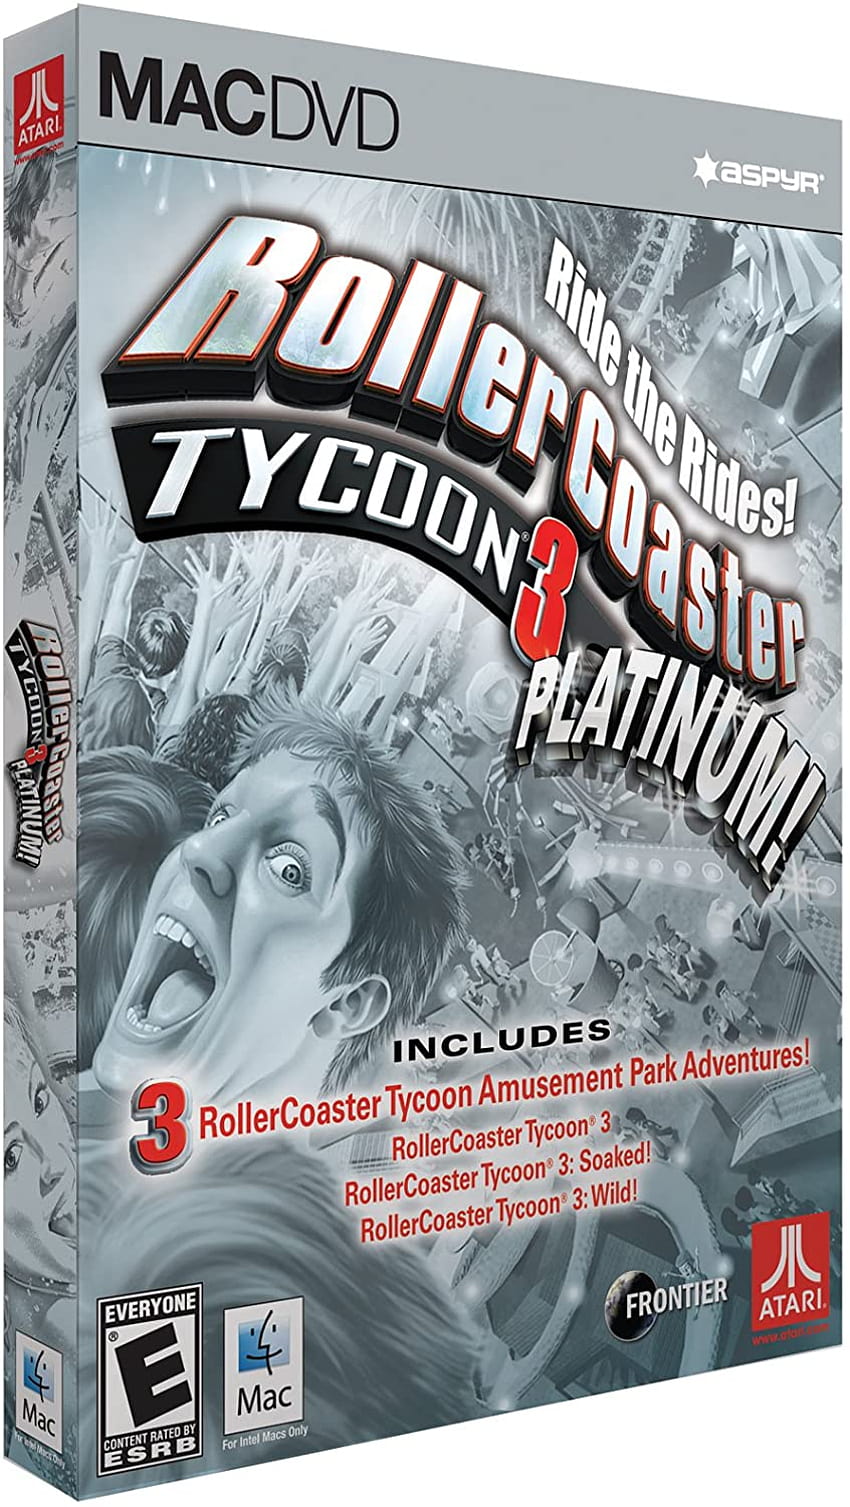 RollerCoaster Tycoon 3 Platinum: Mac: Computer and Video Games HD phone wallpaper